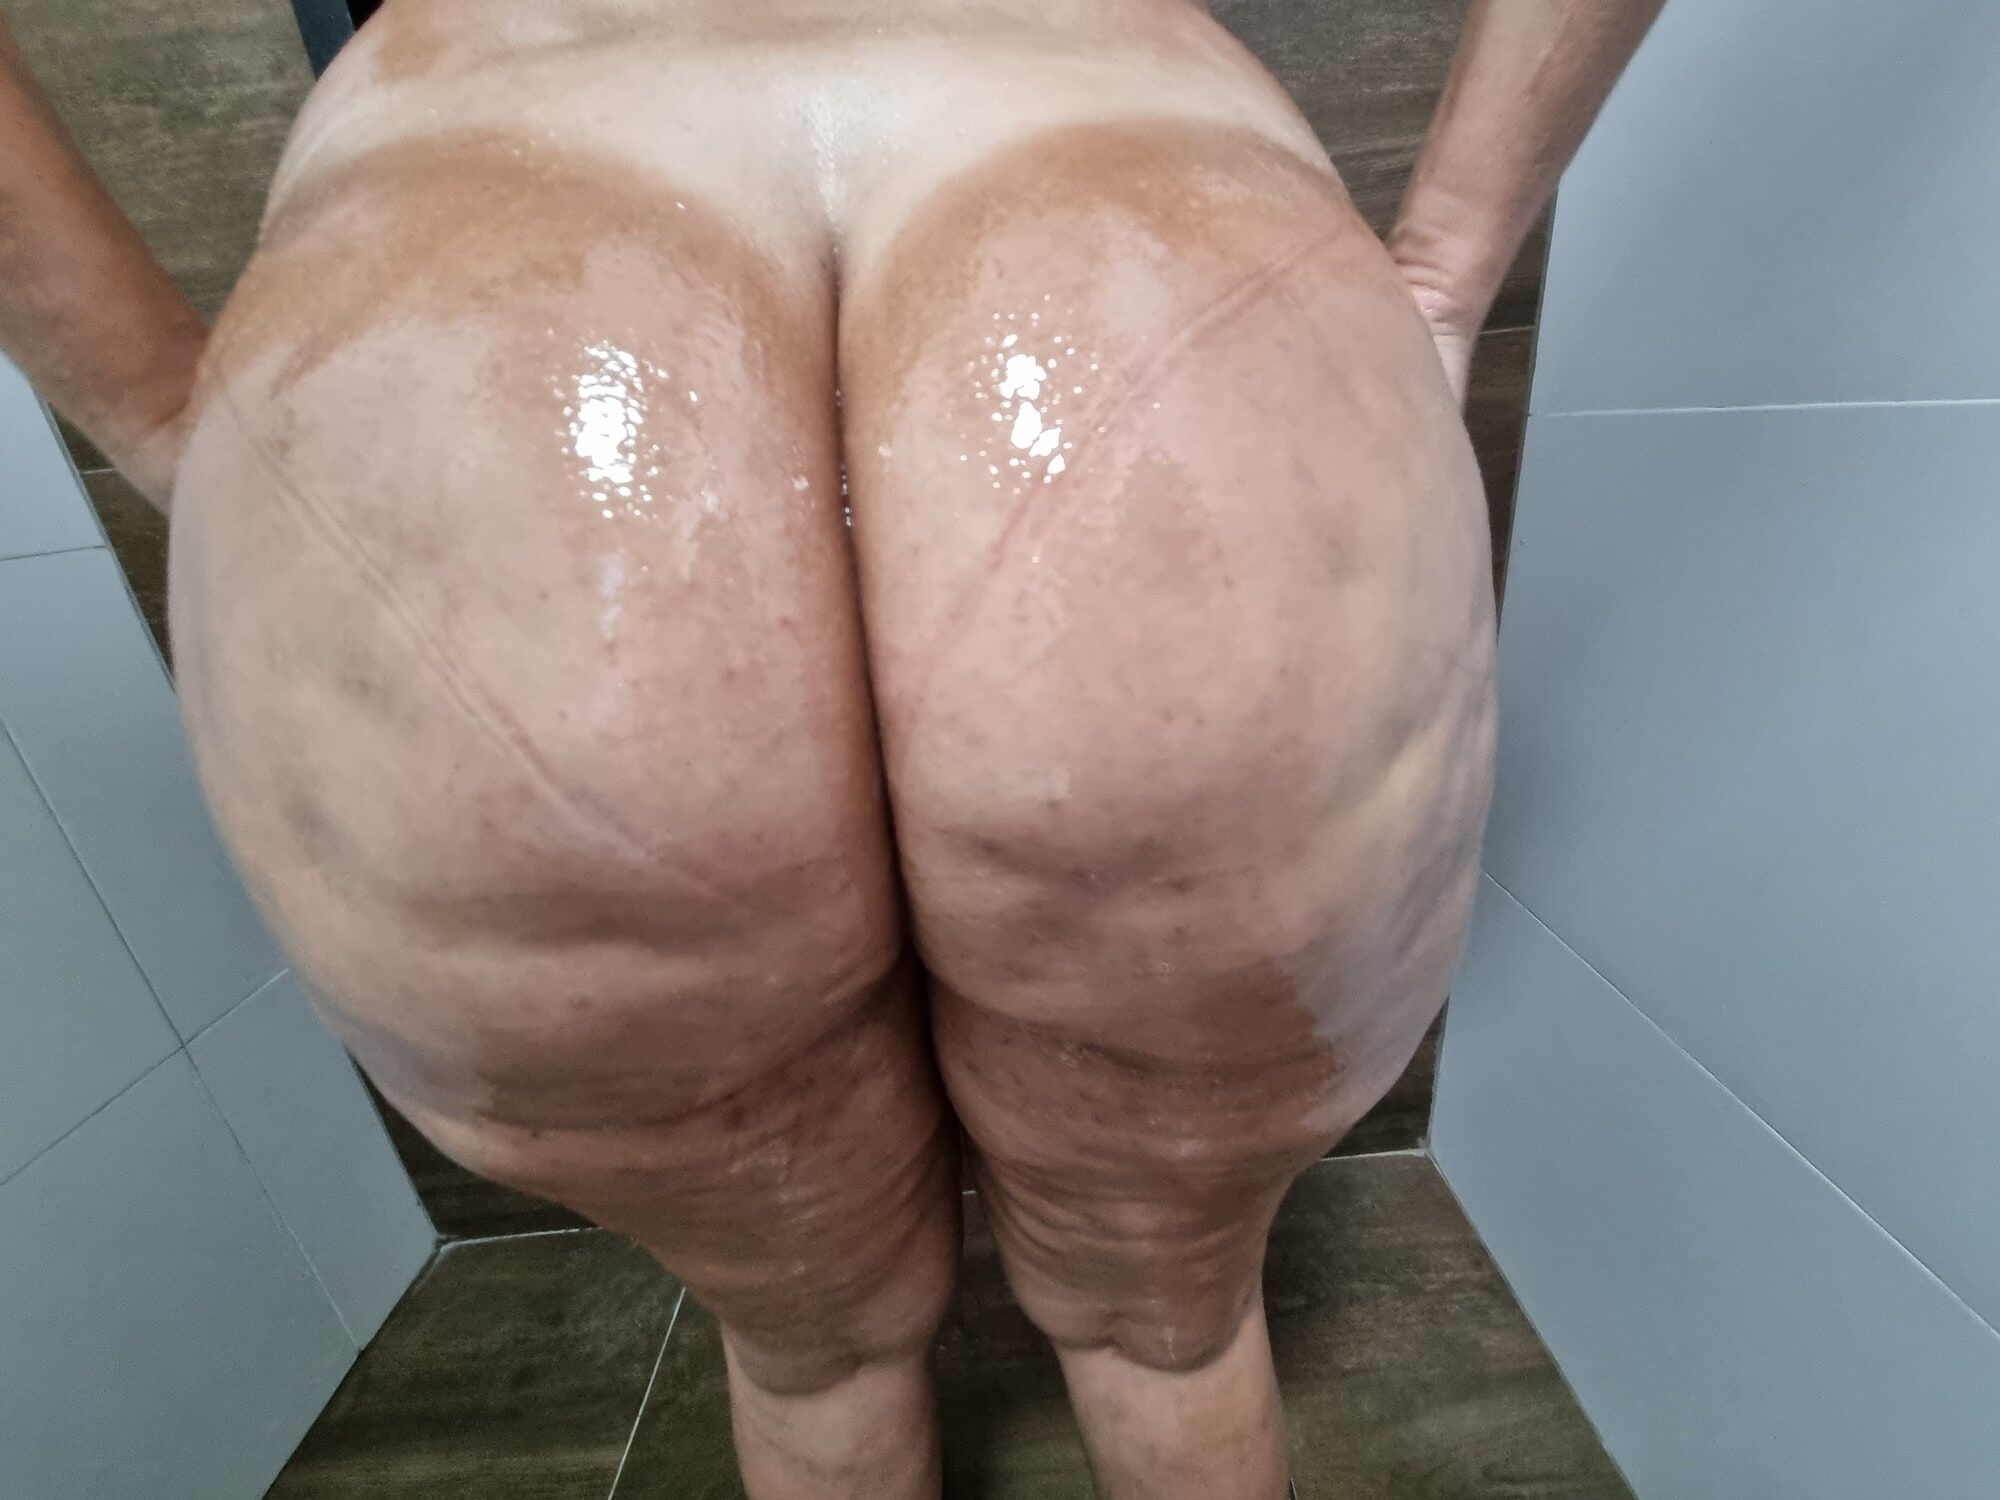 My wifes biggest ass #58